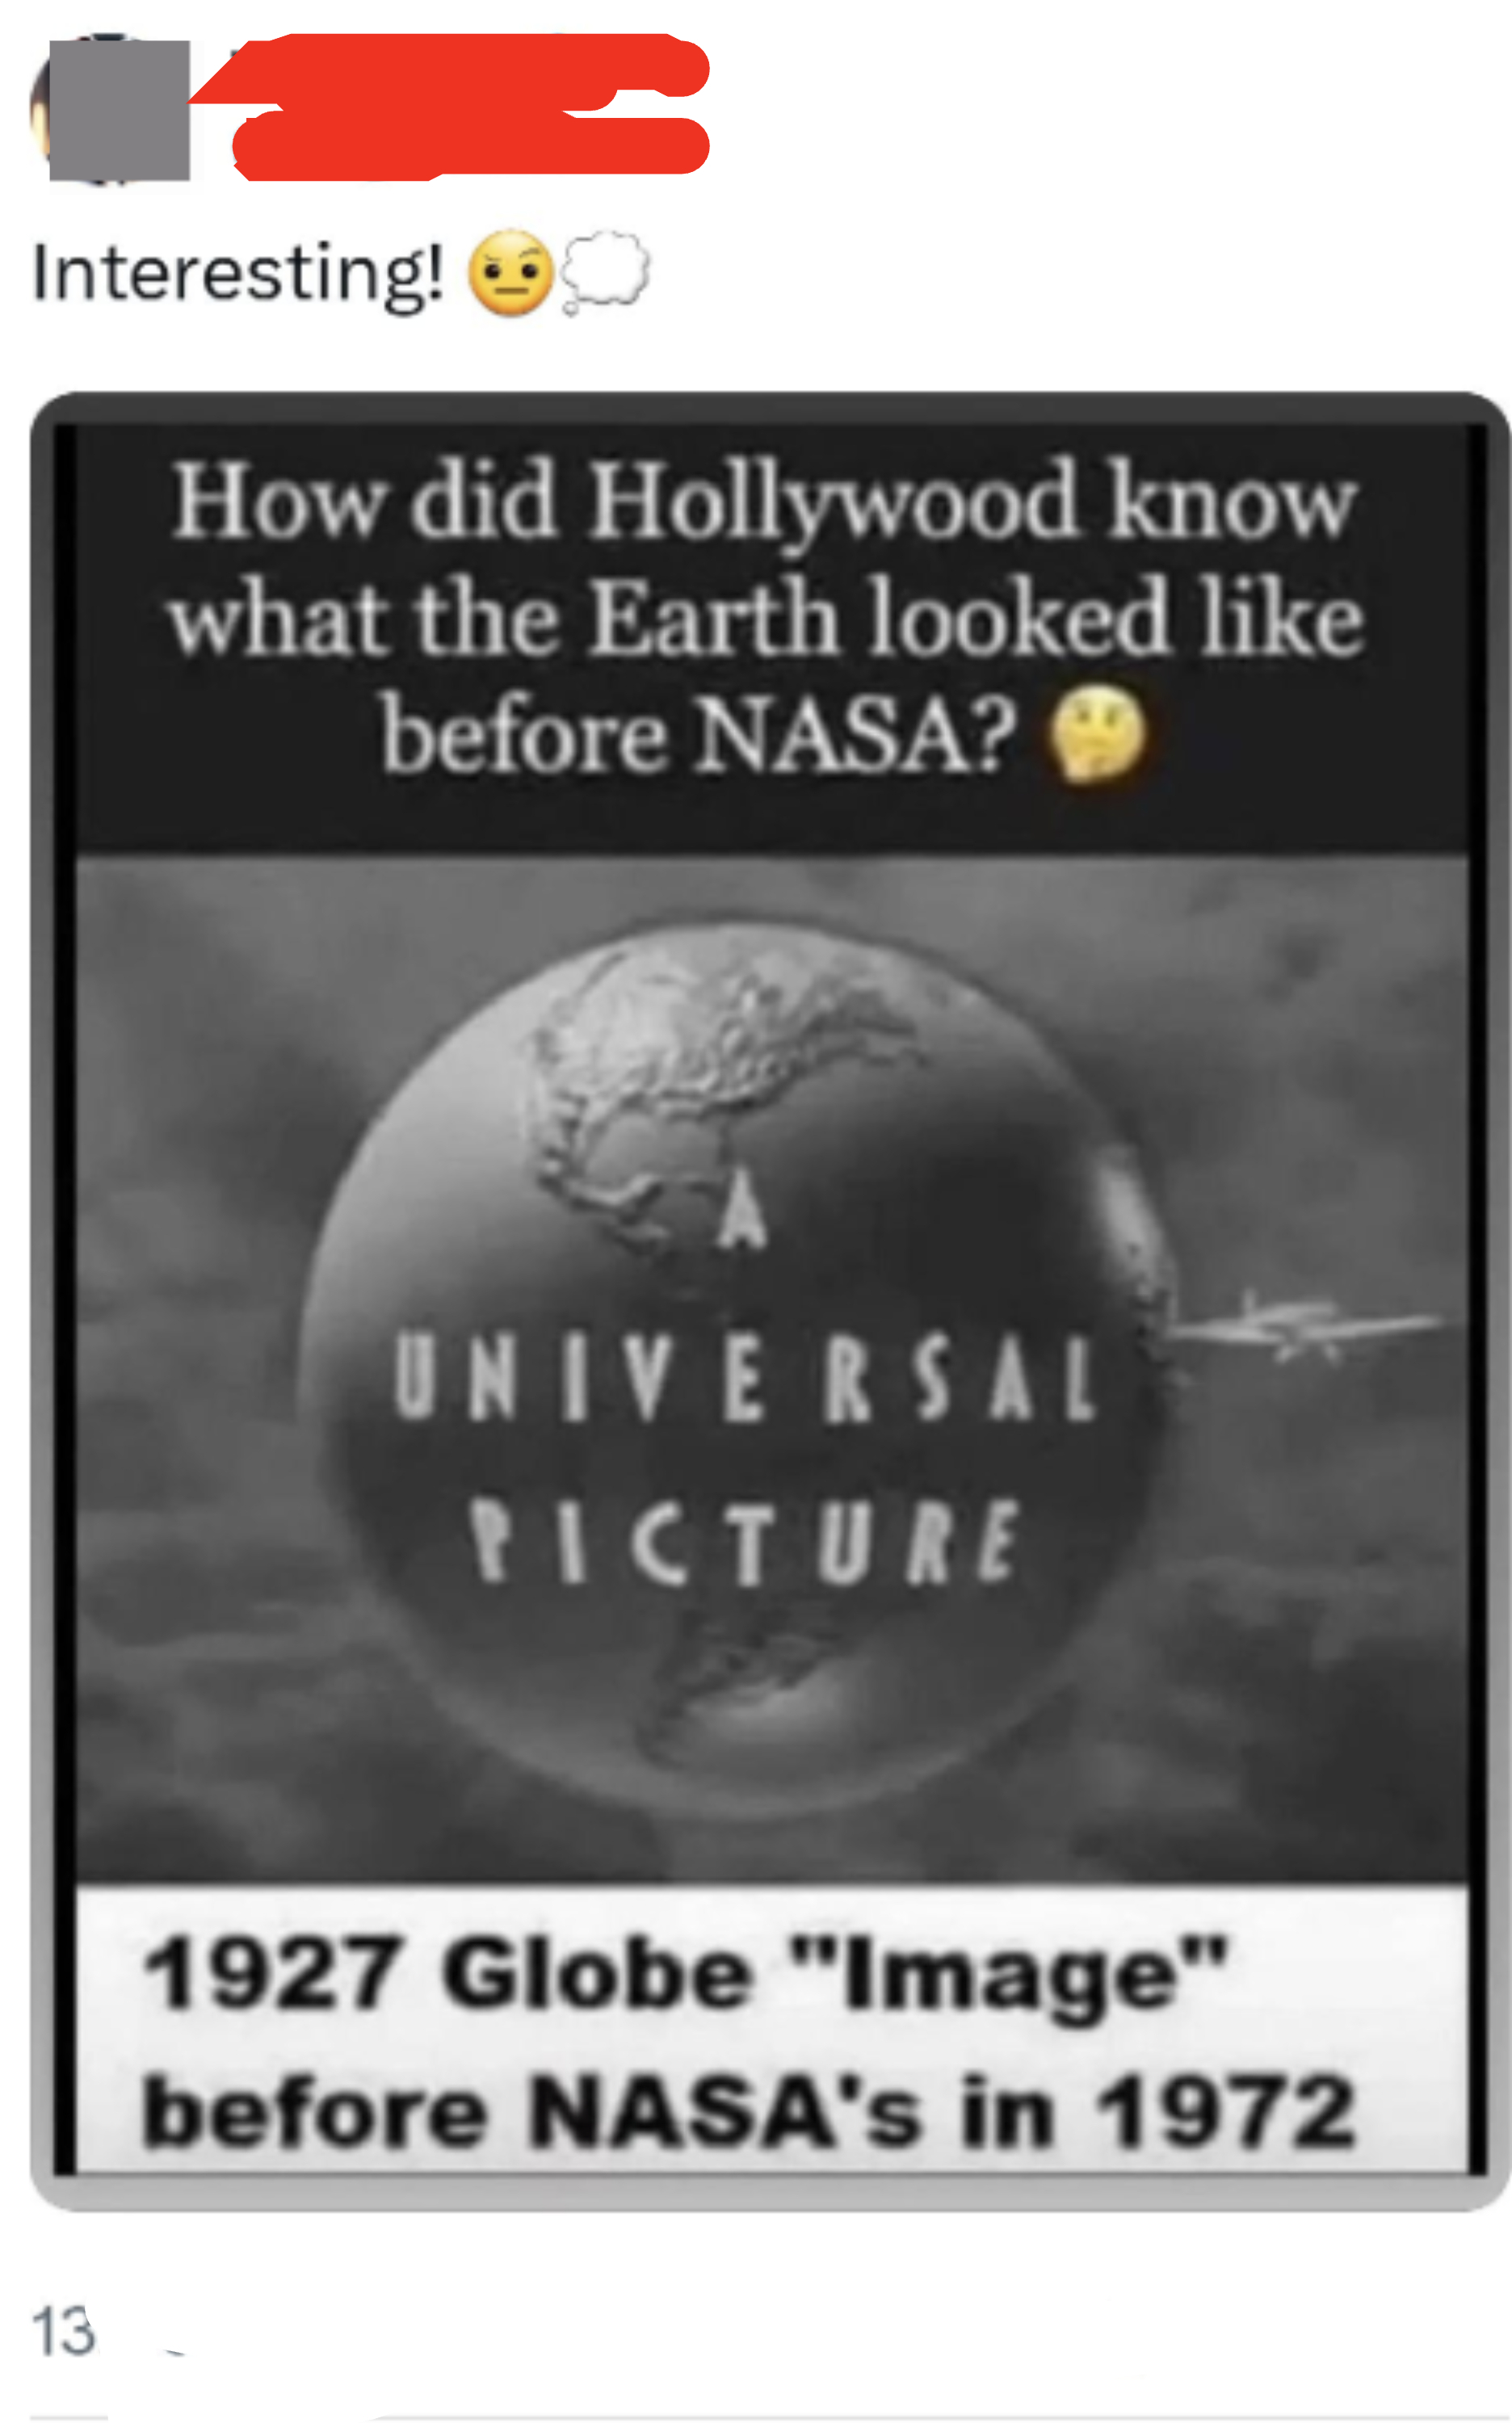 &quot;How did Hollywood know what the Earth looked like before NASA?&quot; with image of a 1927 globe and &quot;A Universal Picture&quot; promo inside it